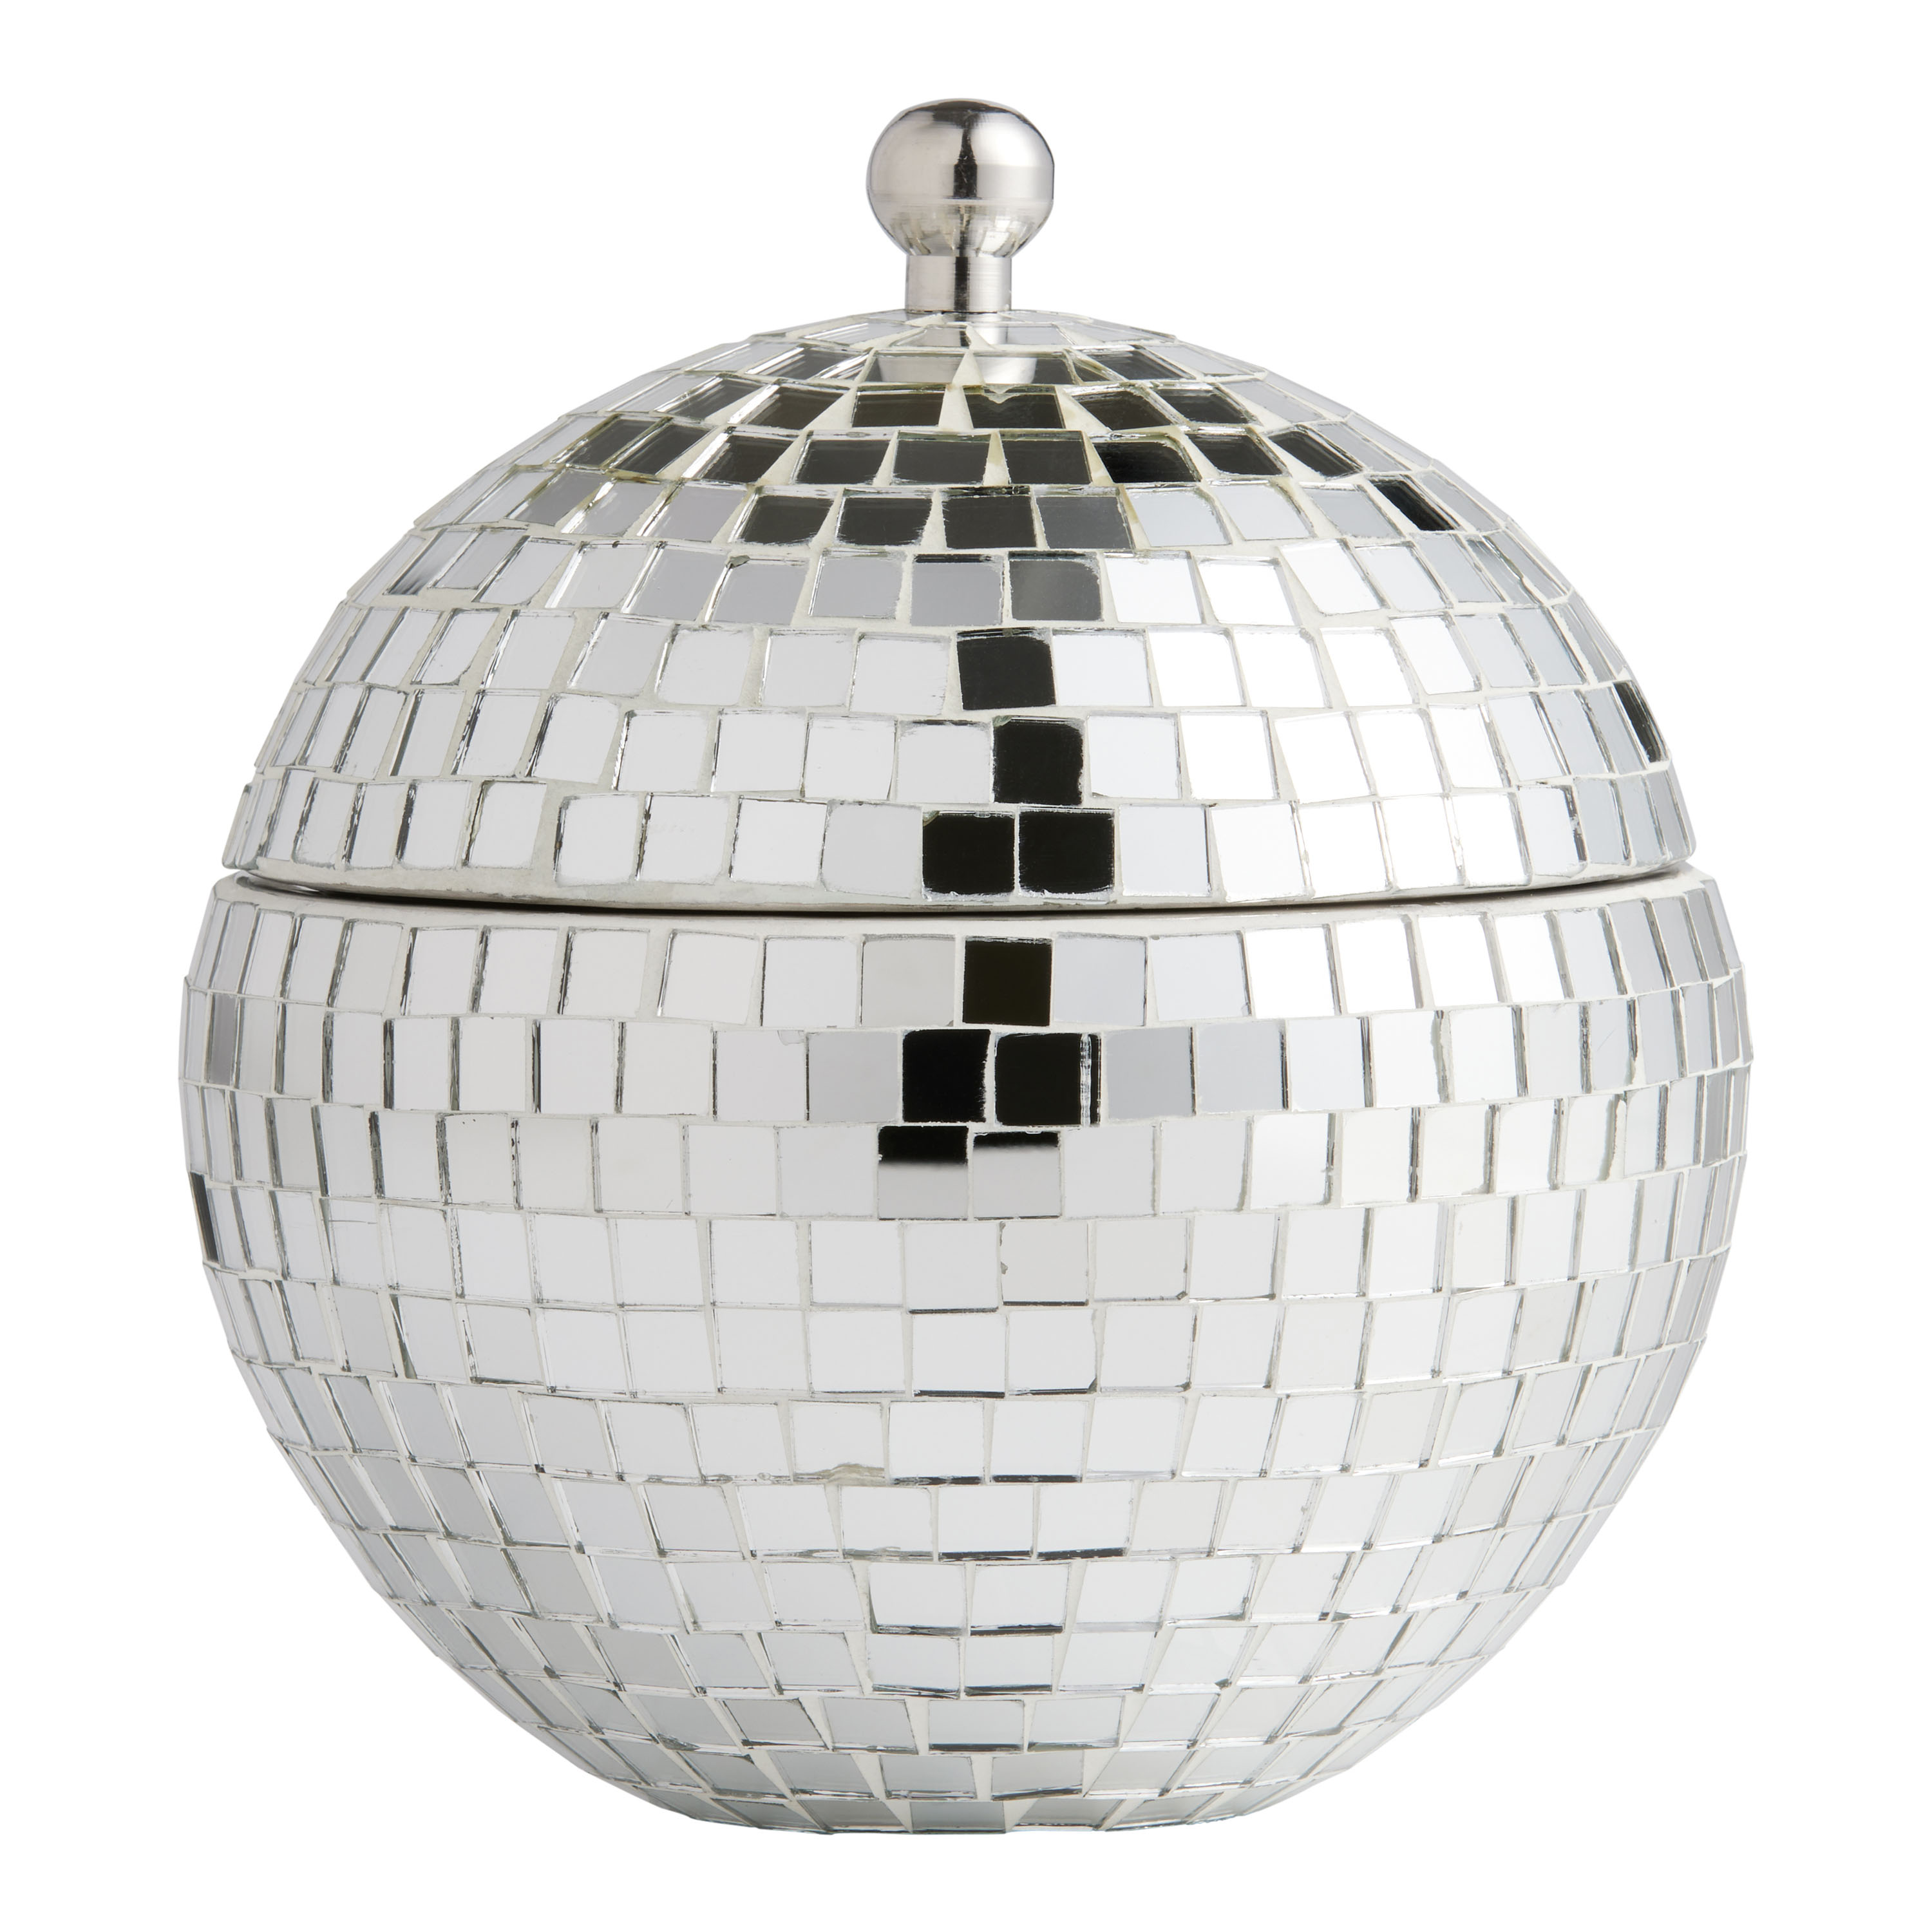 Extra Large Disco Ball